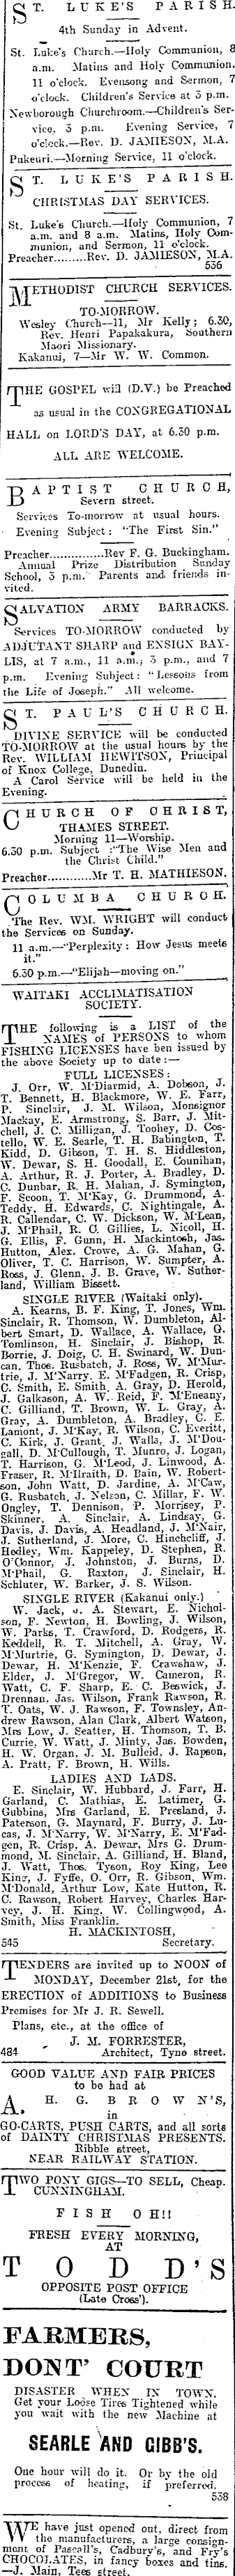 Papers Past Newspapers Oamaru Mail 19 December 1908 Page 3 Advertisements Column 3